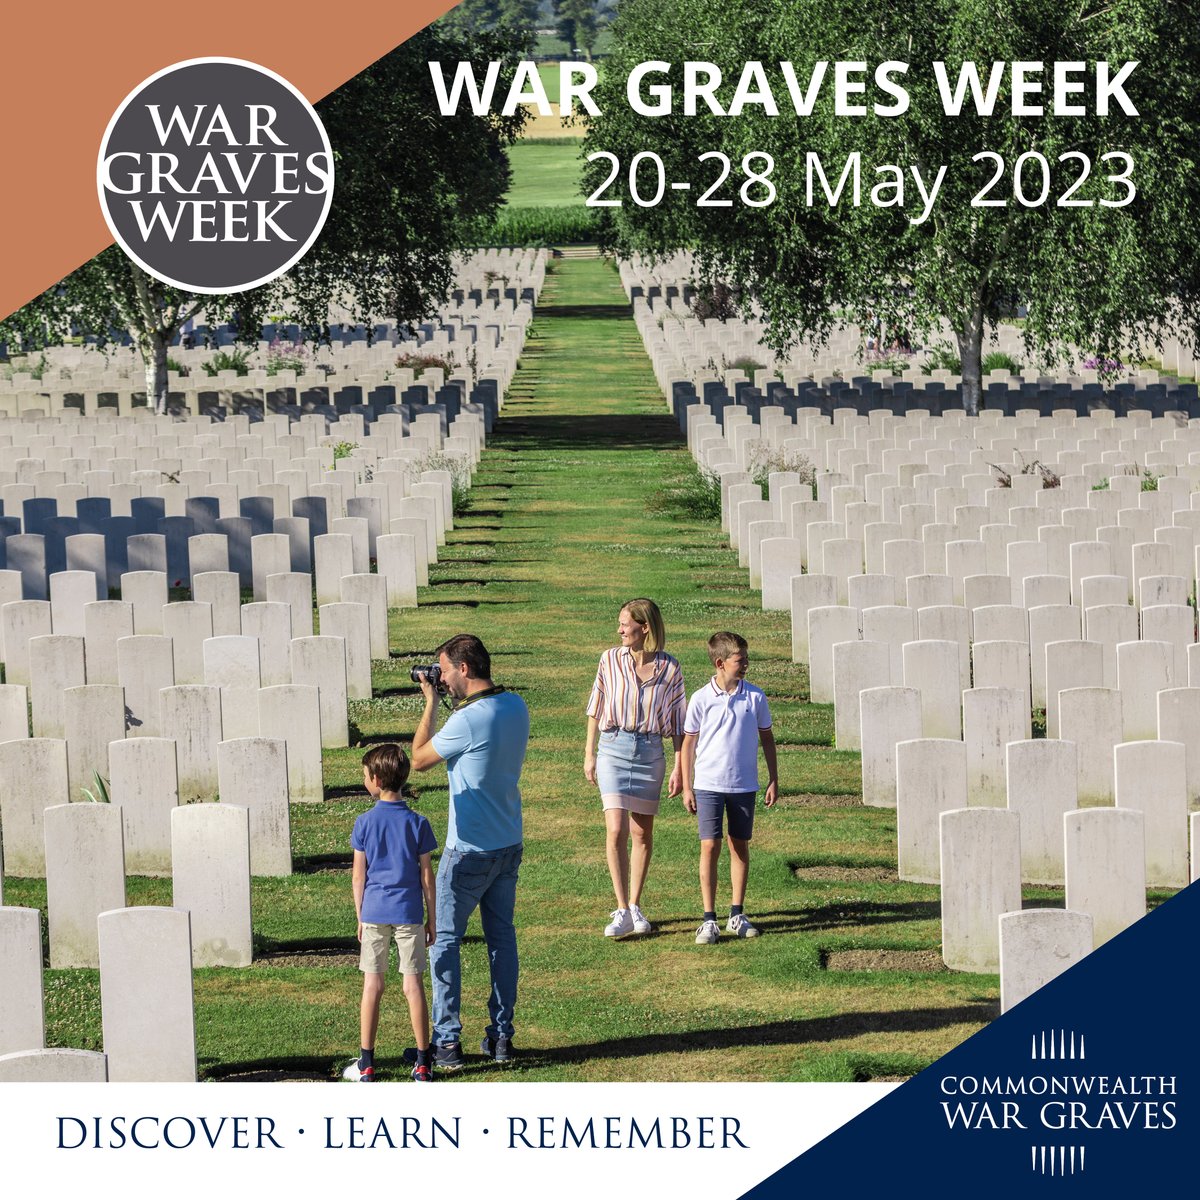 This #WarGravesWeek, we're bringing events to more locations than ever before. Follow the link to find out what's happening in your area, starting from tomorrow till the 28th May: ow.ly/XRwi50Oo79Z Book your free tour now before it's sold out!